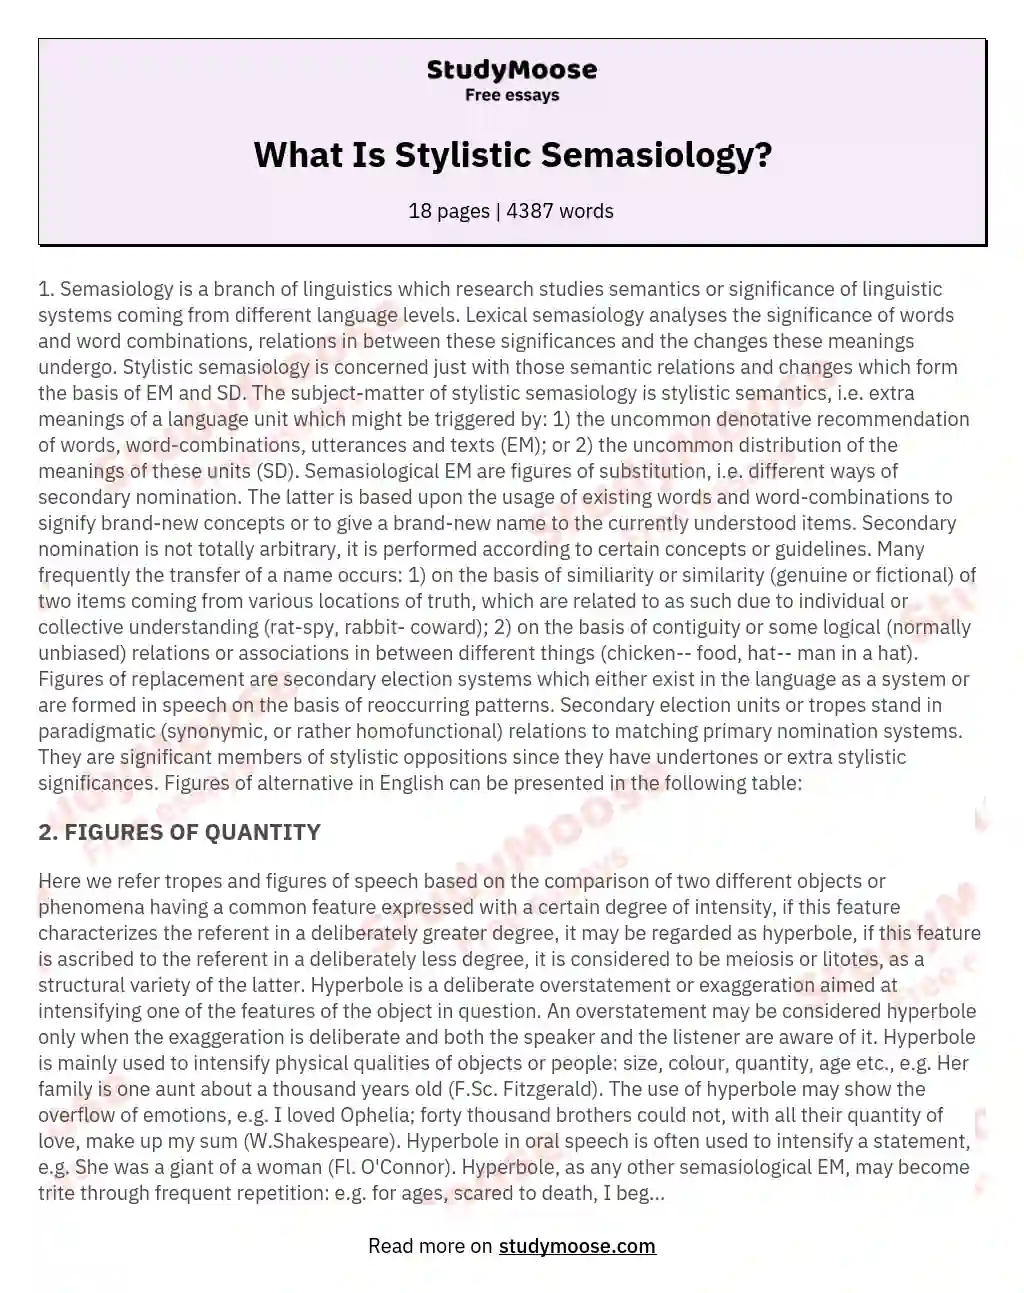 What Is Stylistic Semasiology?